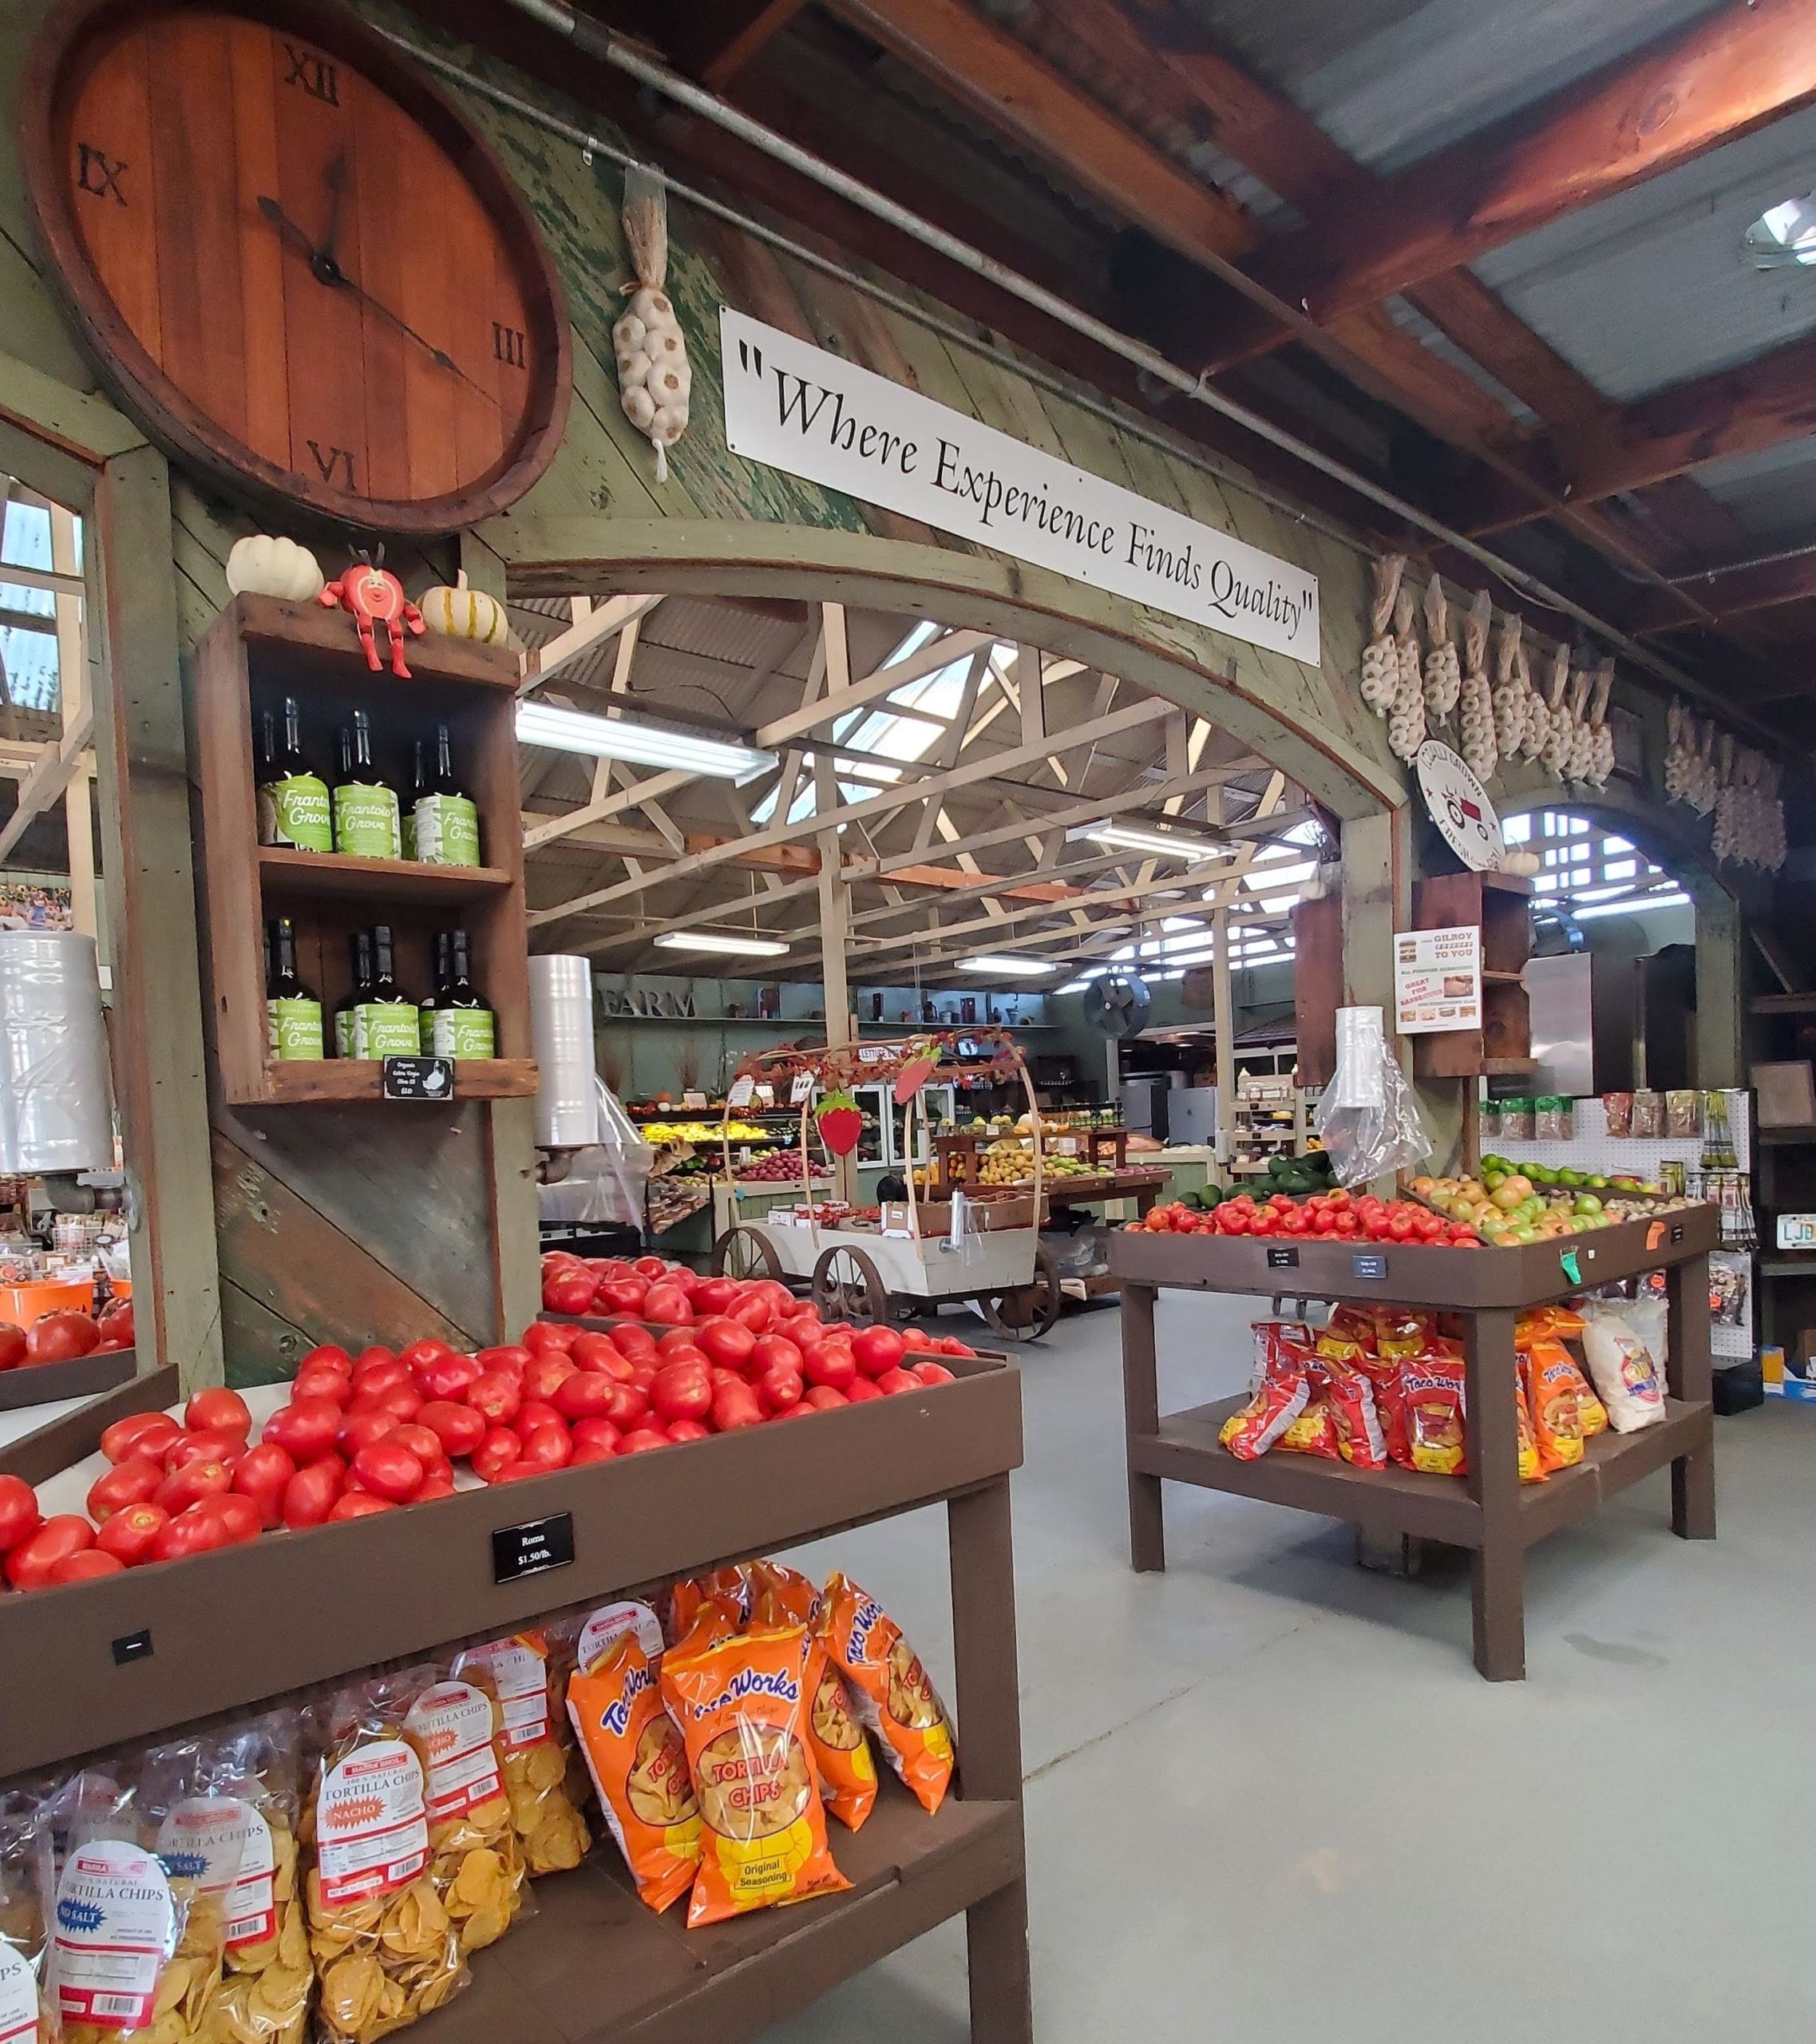 Inside the LJB farmhouse store, showing fresh tomatoes apples, olive oils, garlic braids, and bagged chips.